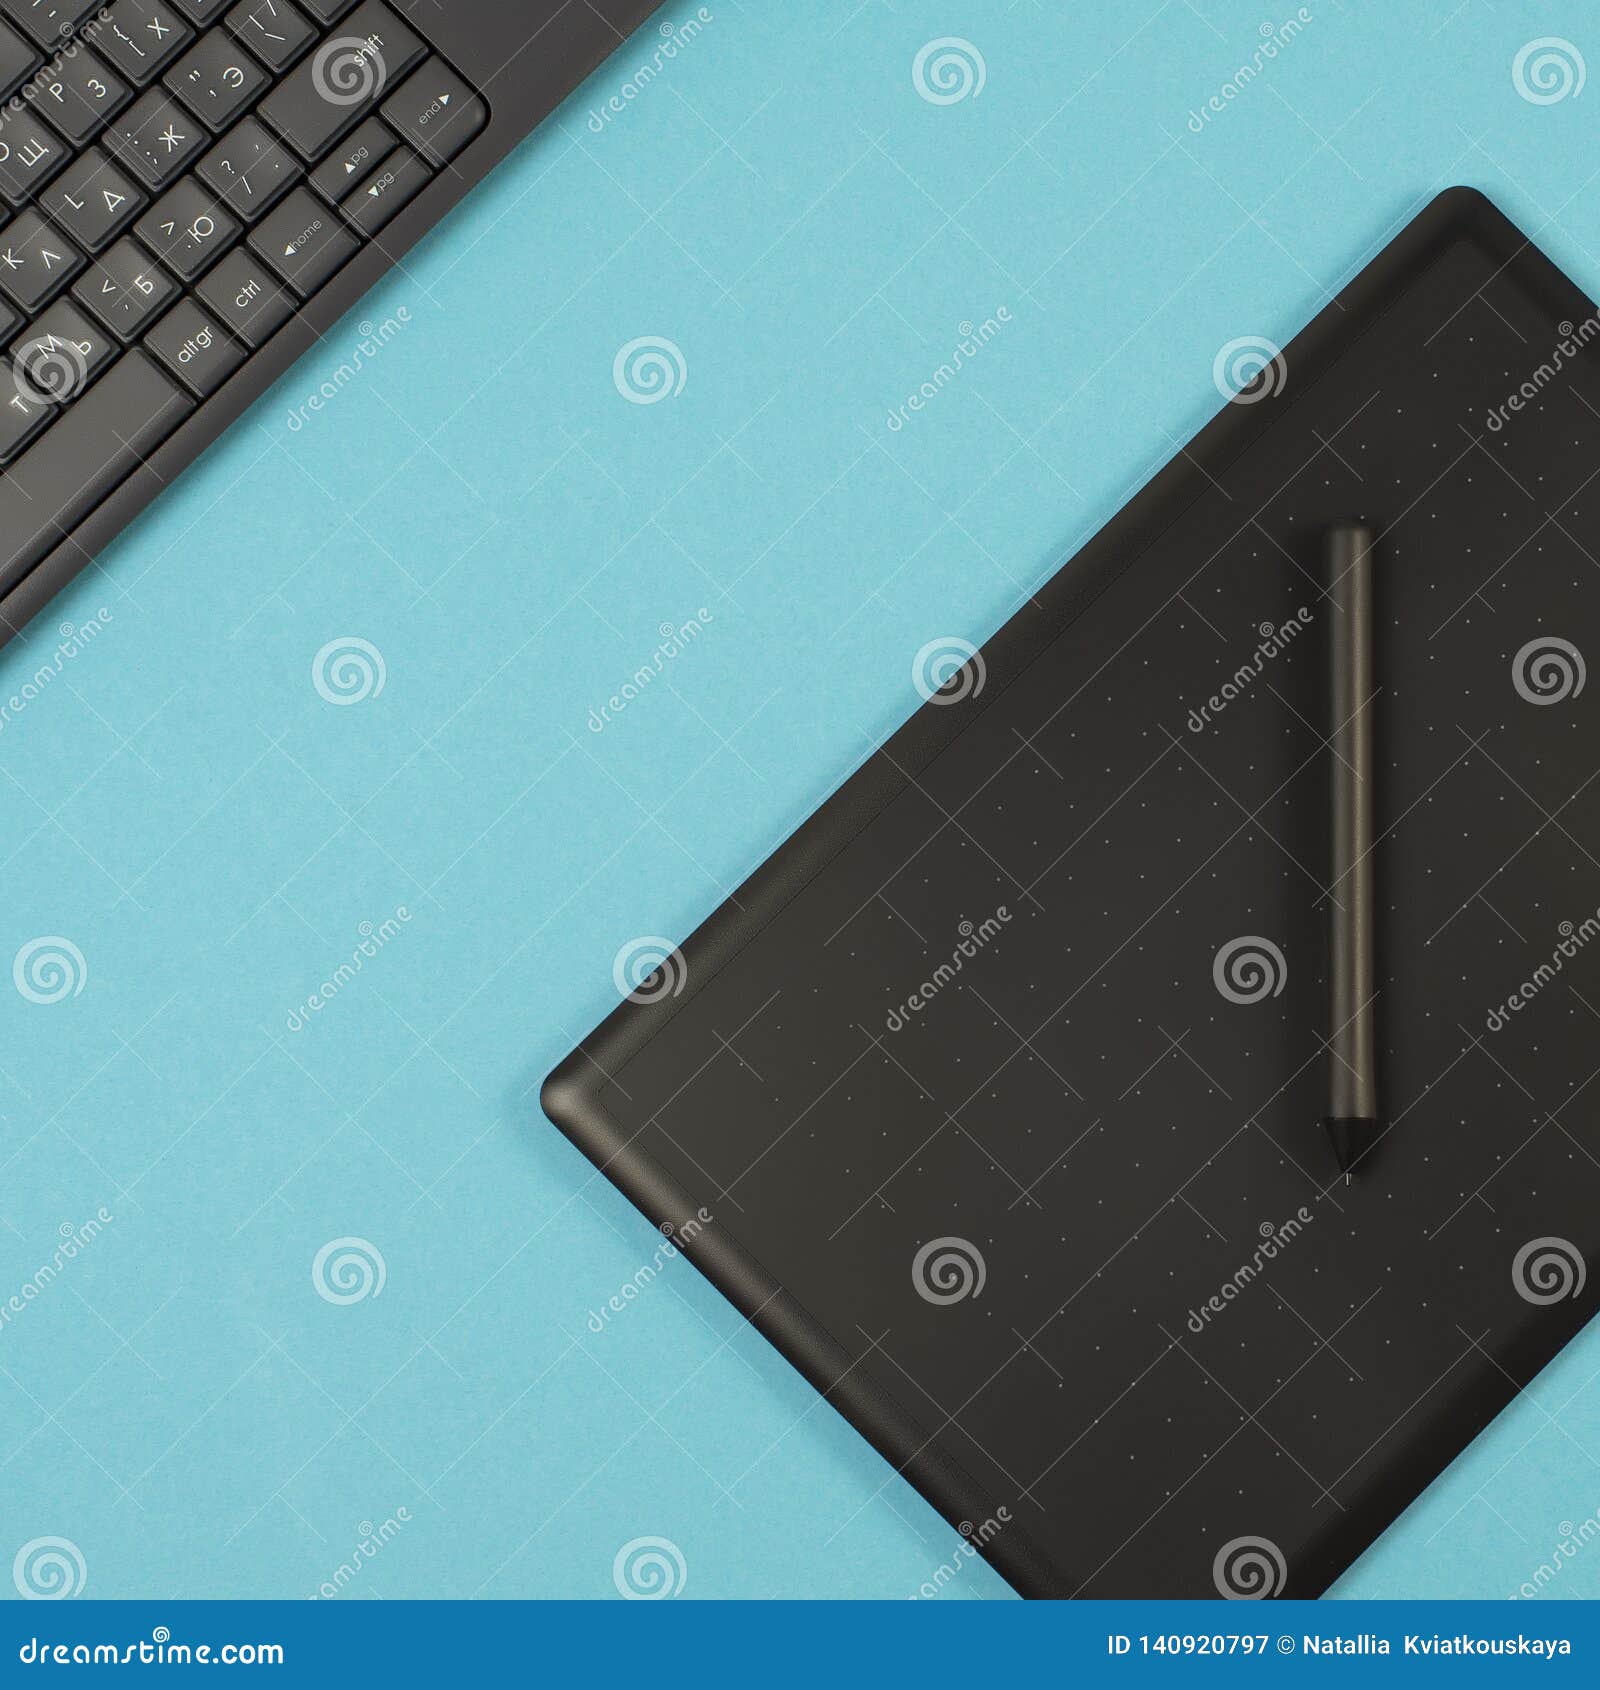 Graphics Tablet And Keyboard On A Blue Background. Space For Text